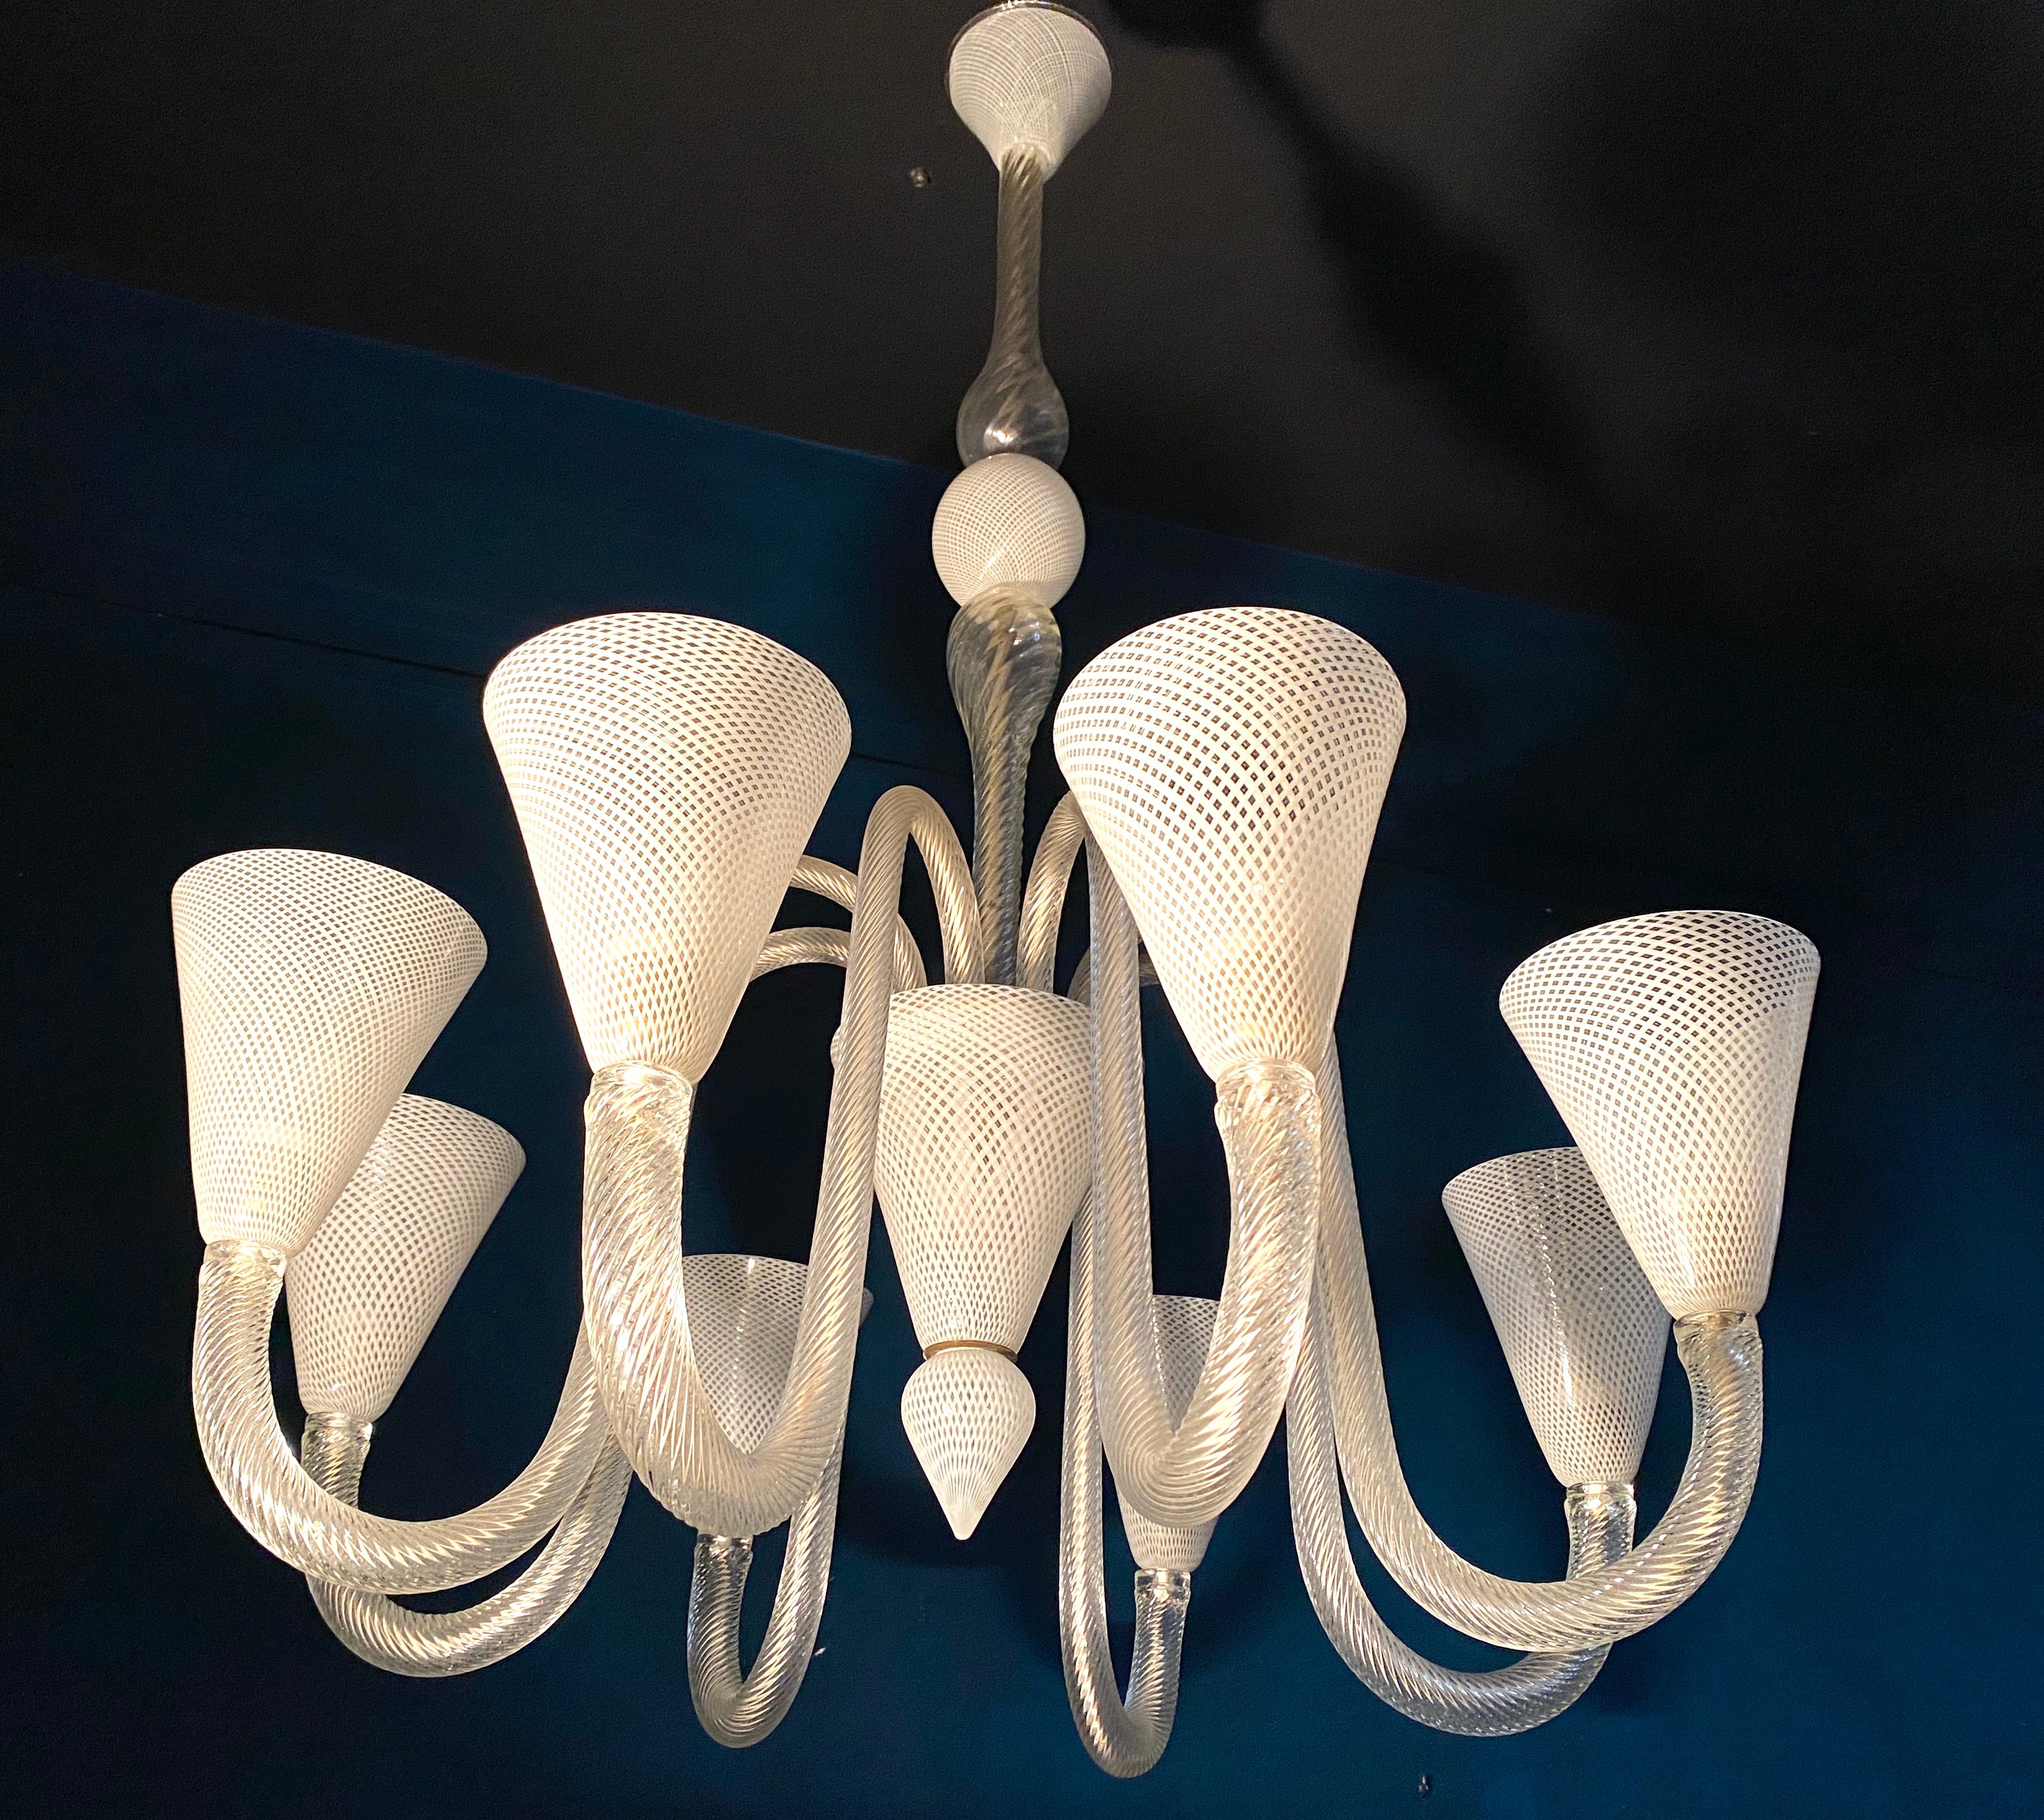 Magnificent Art Deco Murano Glass Chandelier by Venini 1940s In Excellent Condition For Sale In Rome, IT